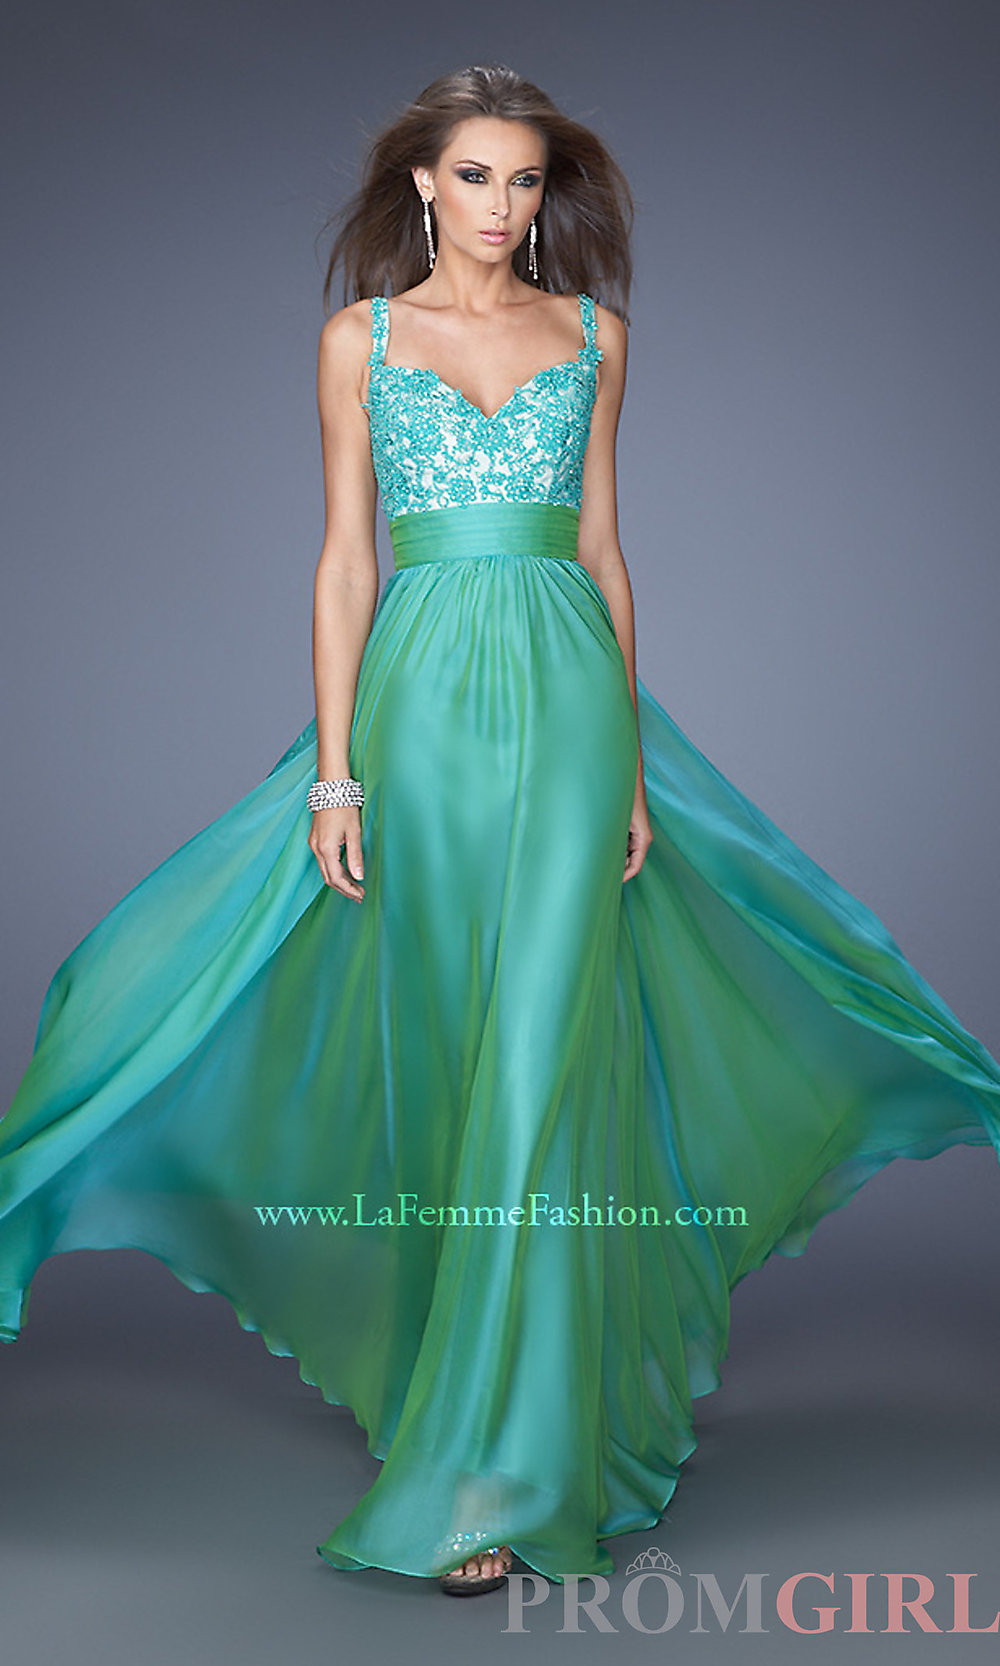 Latest Fancy Gowns, Prom and Cocktail dresses for Weddings and Parties 2014-2015 (7)